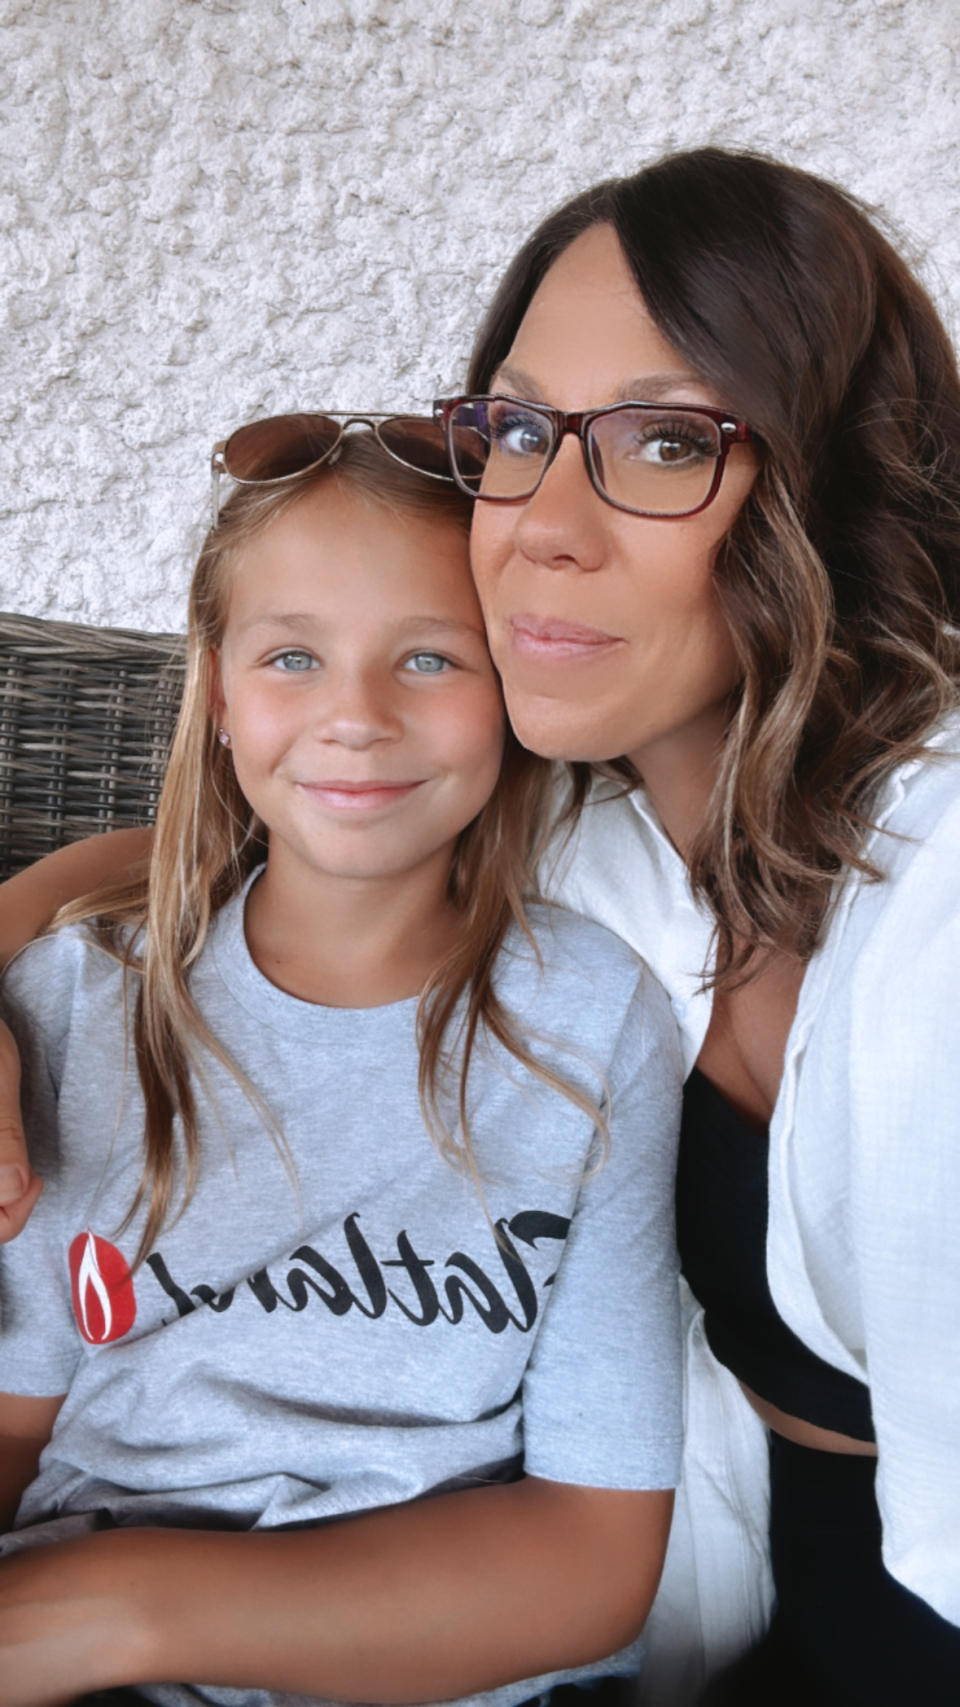 Danielle pictured smiling with her daughter. 